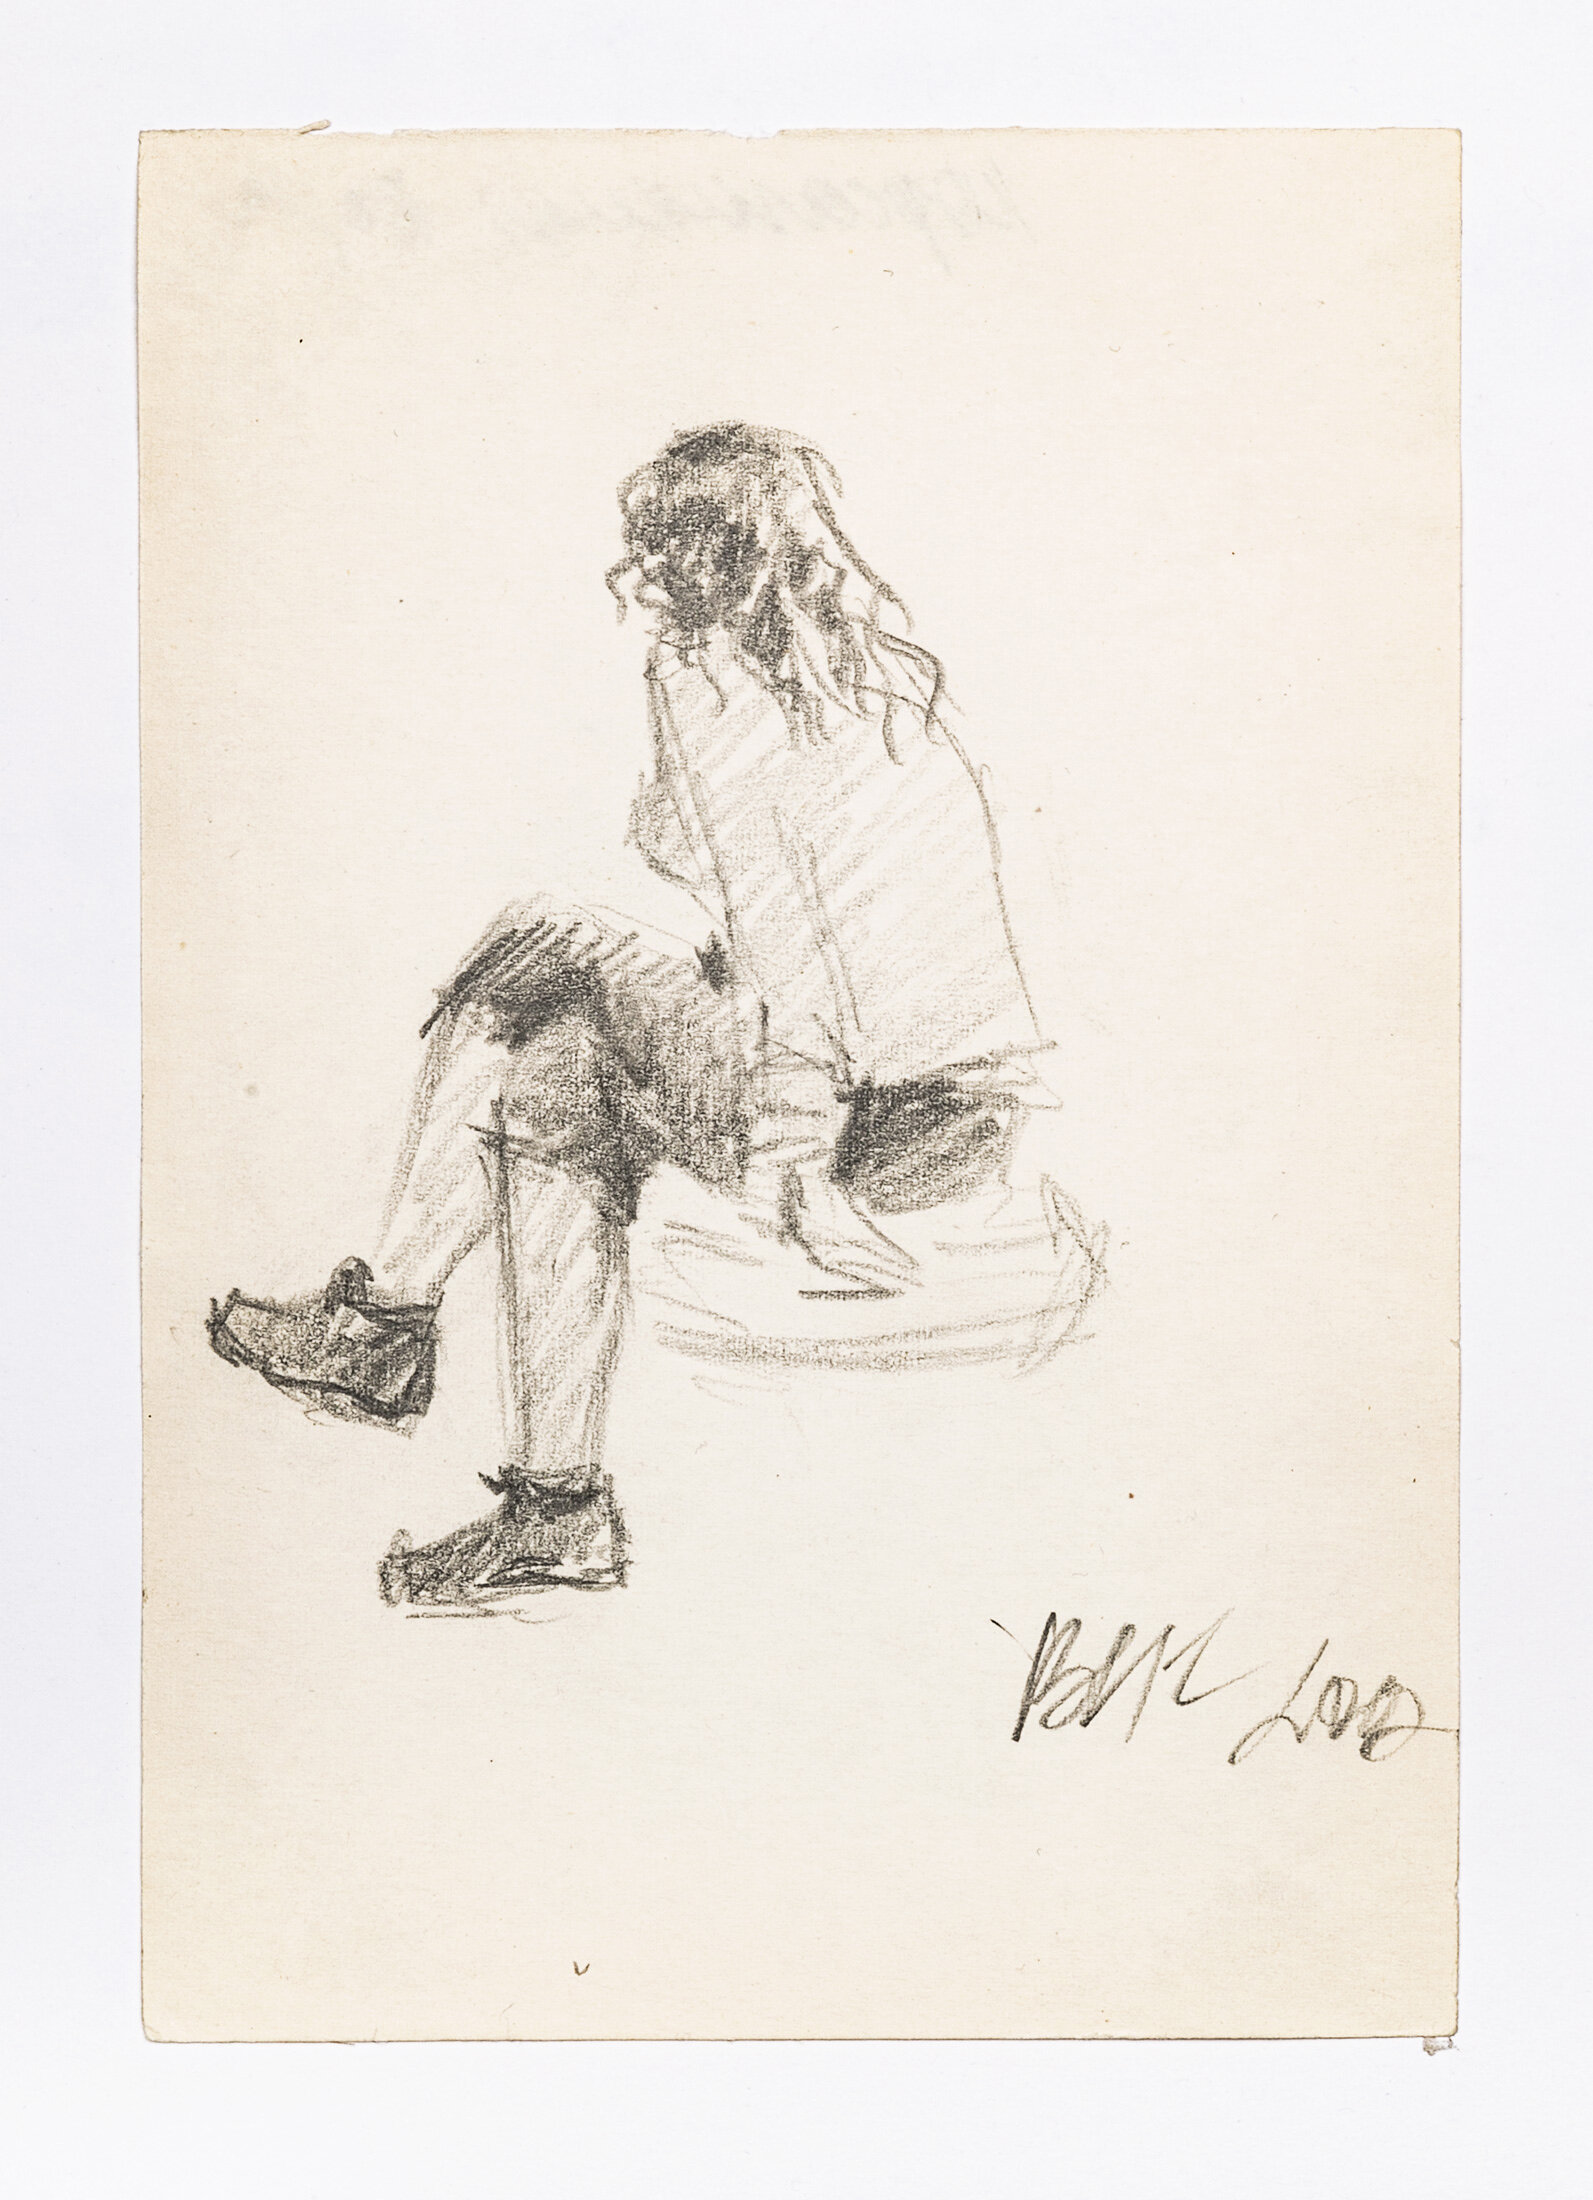 Katya Sitting on a Bench, 2002 - graphite pencil on paper